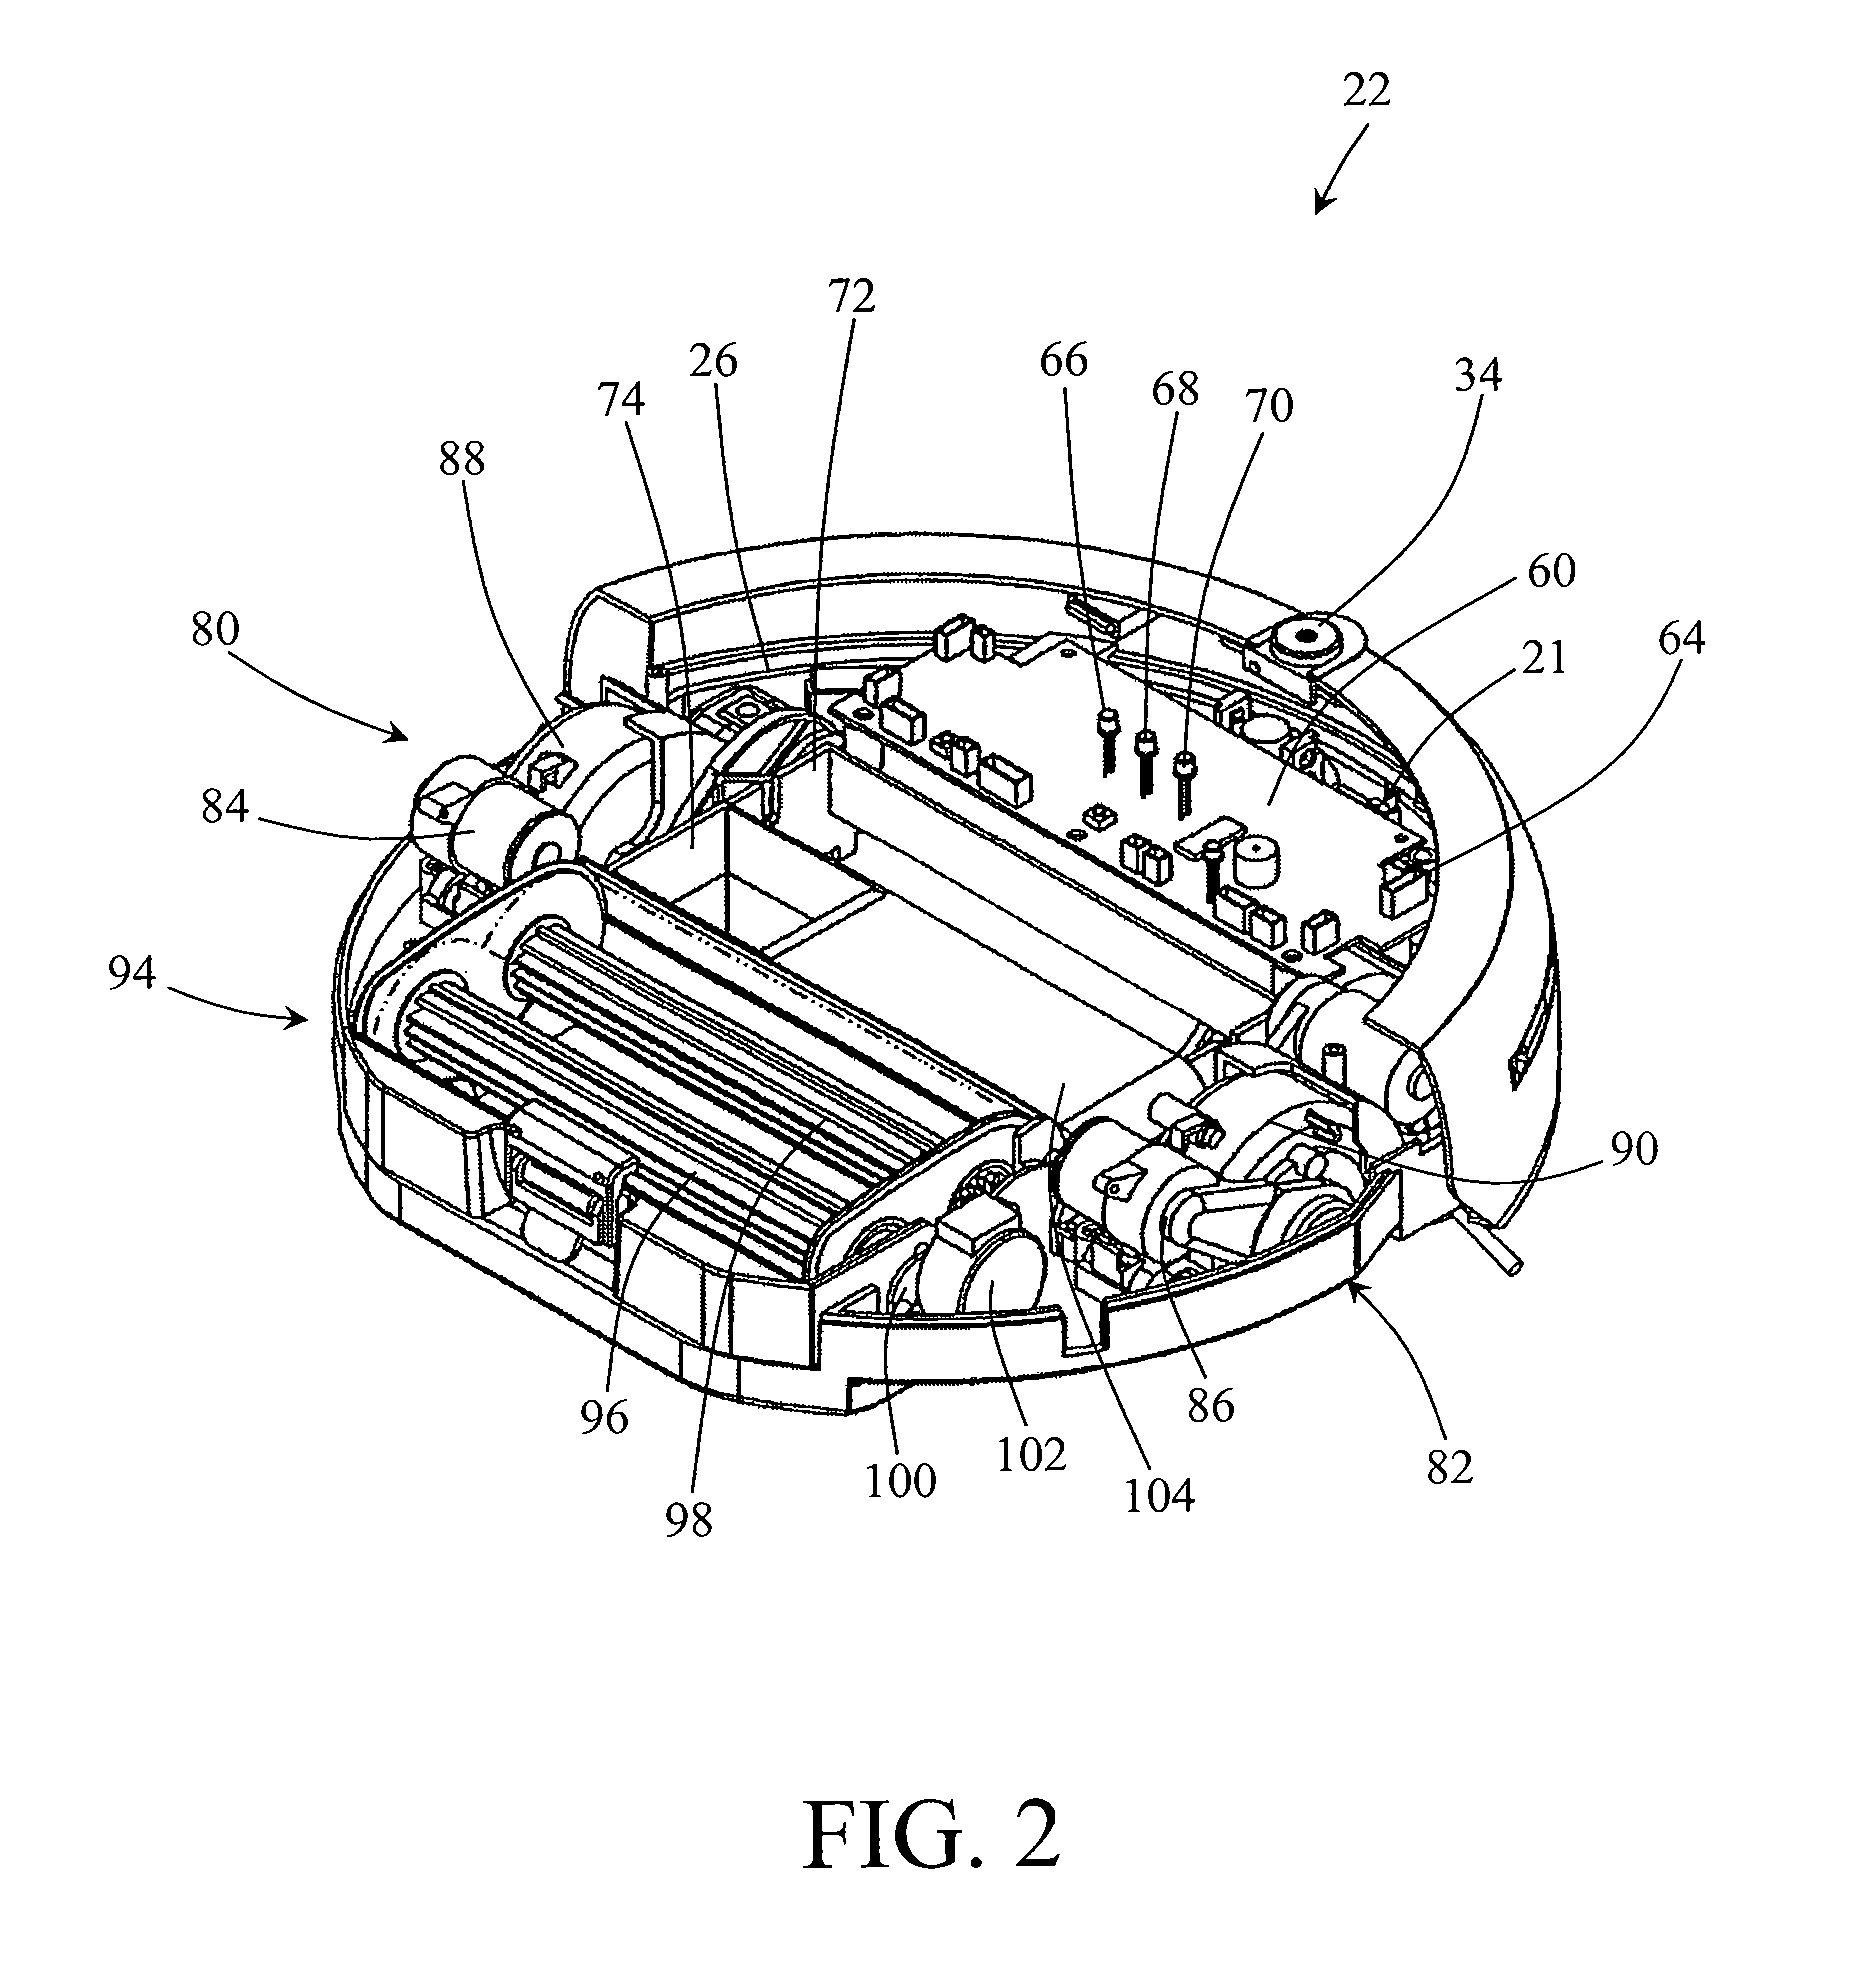 Trainable Multi-Mode Floor Cleaning Device